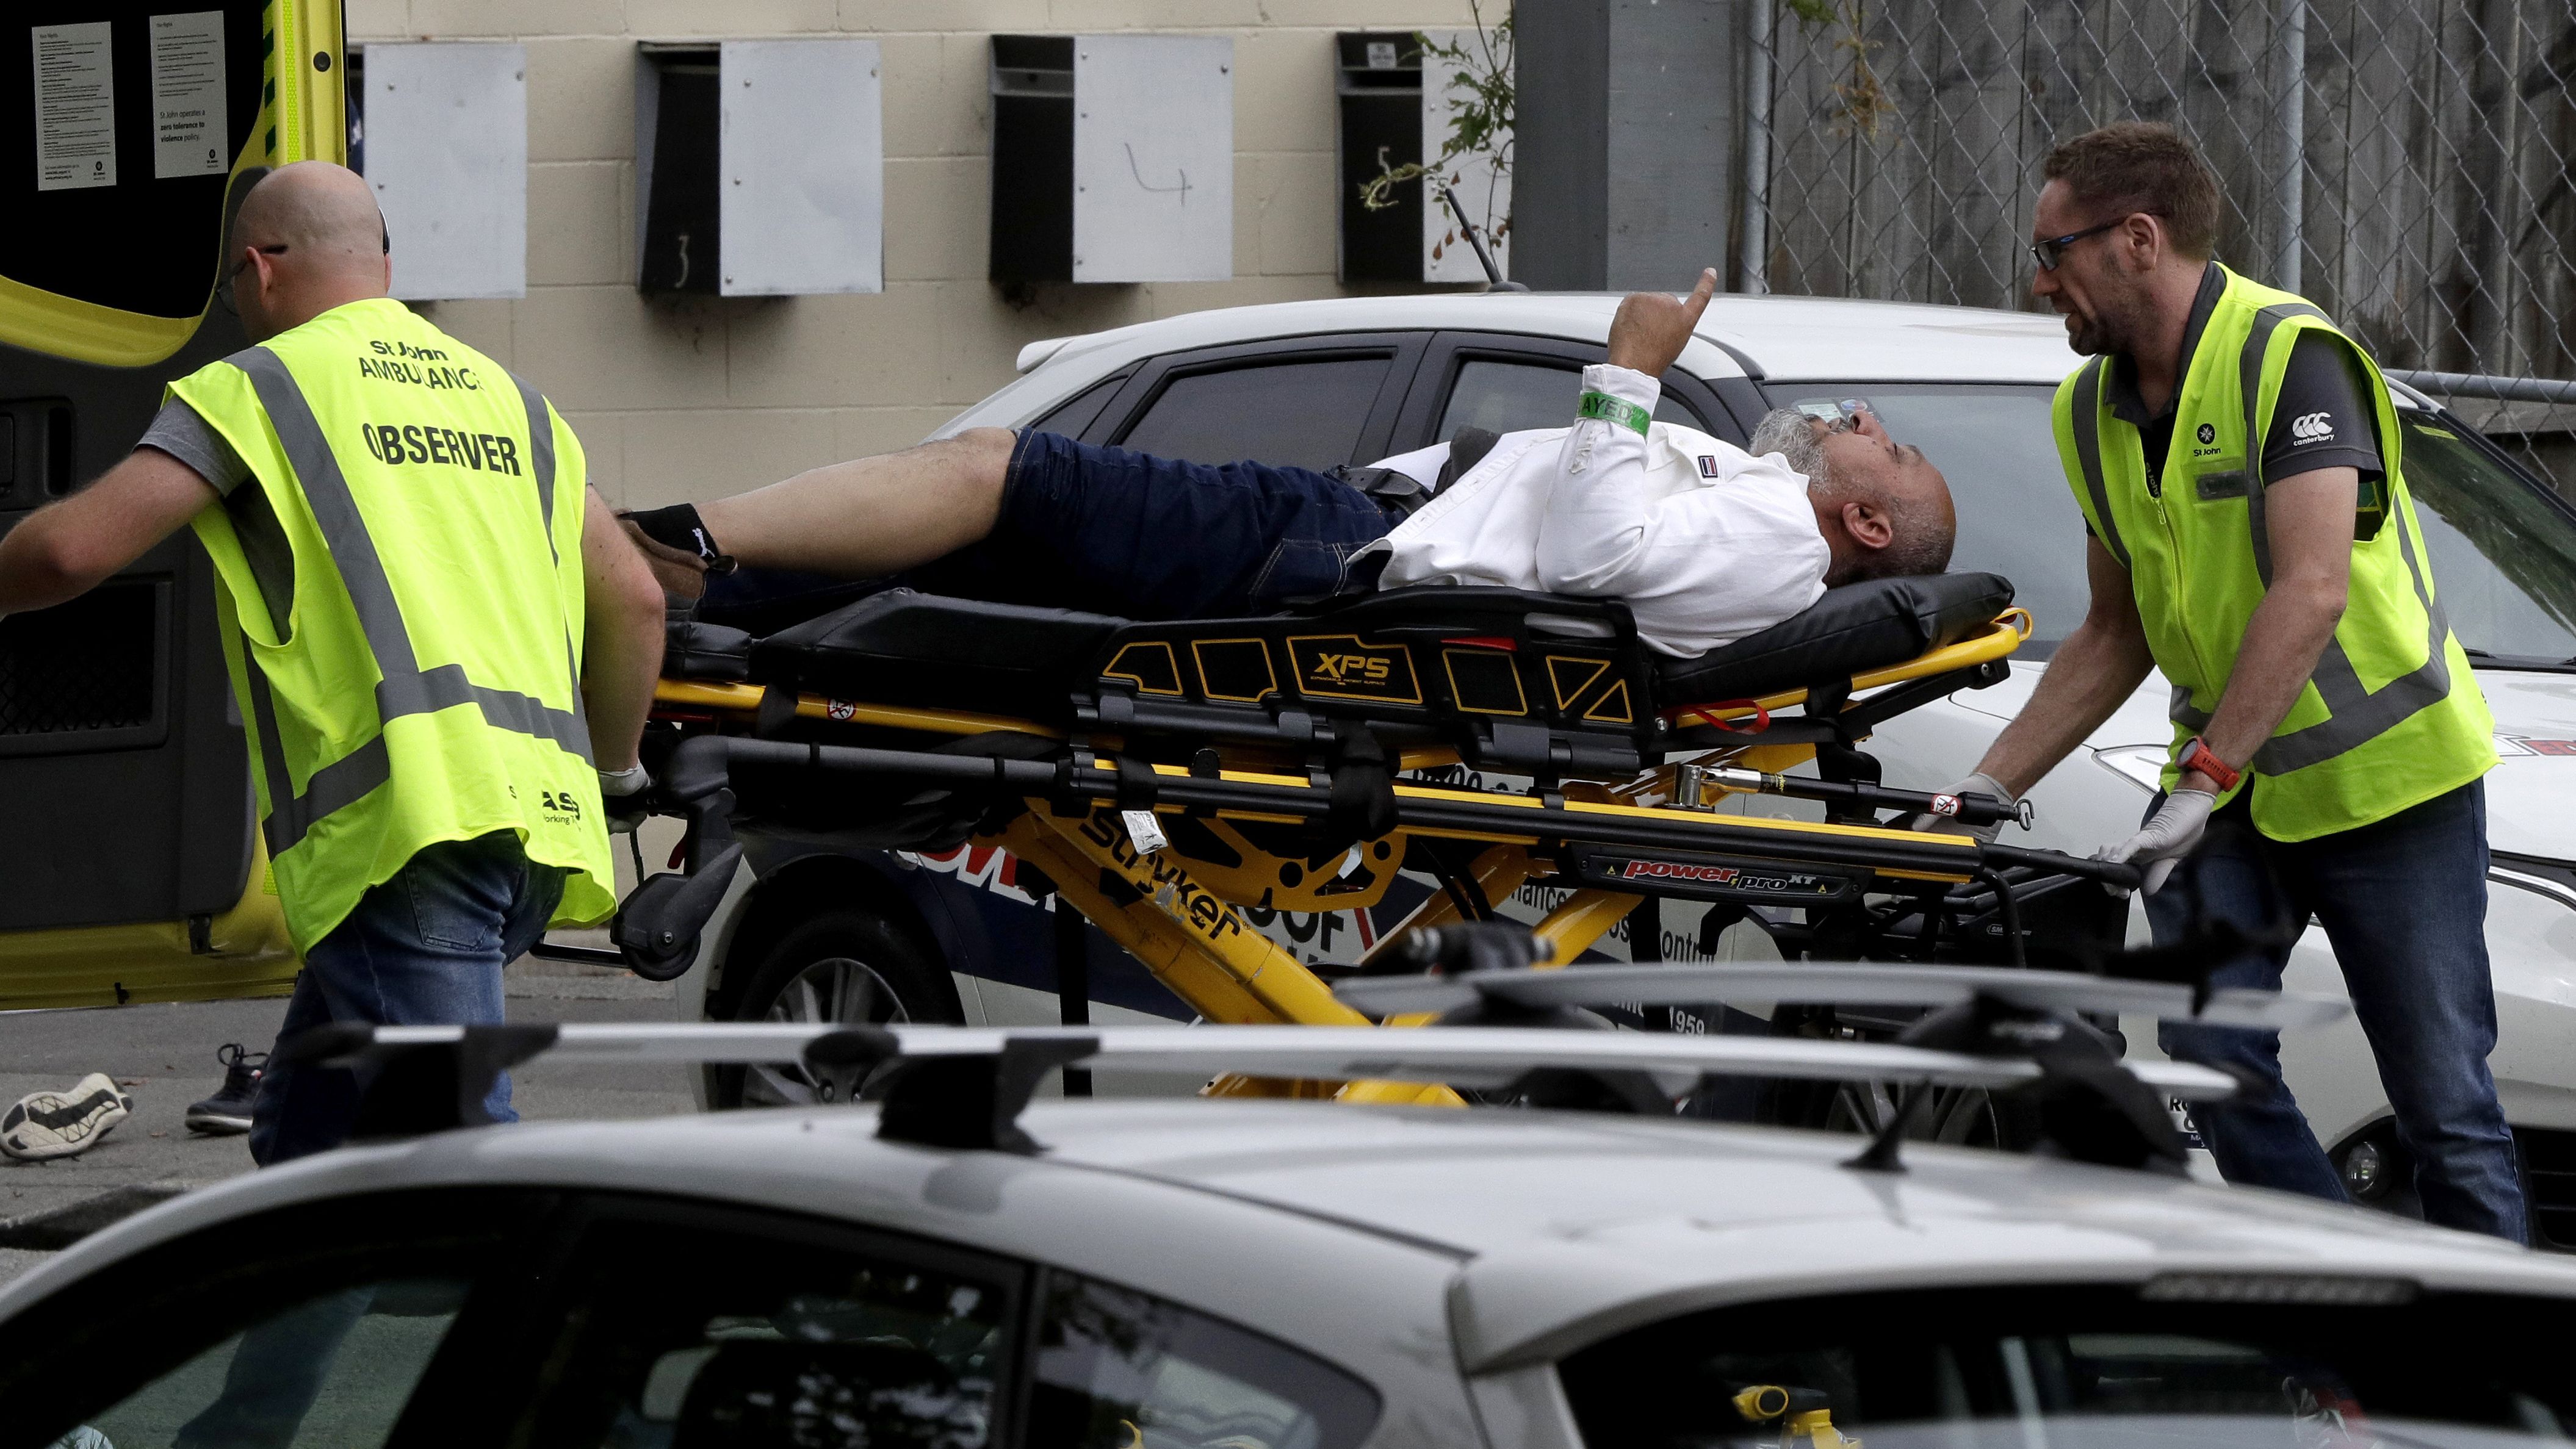 Paramedics load an injured man into an ambulance in Christchurch, New Zealand, on Friday, March 15.